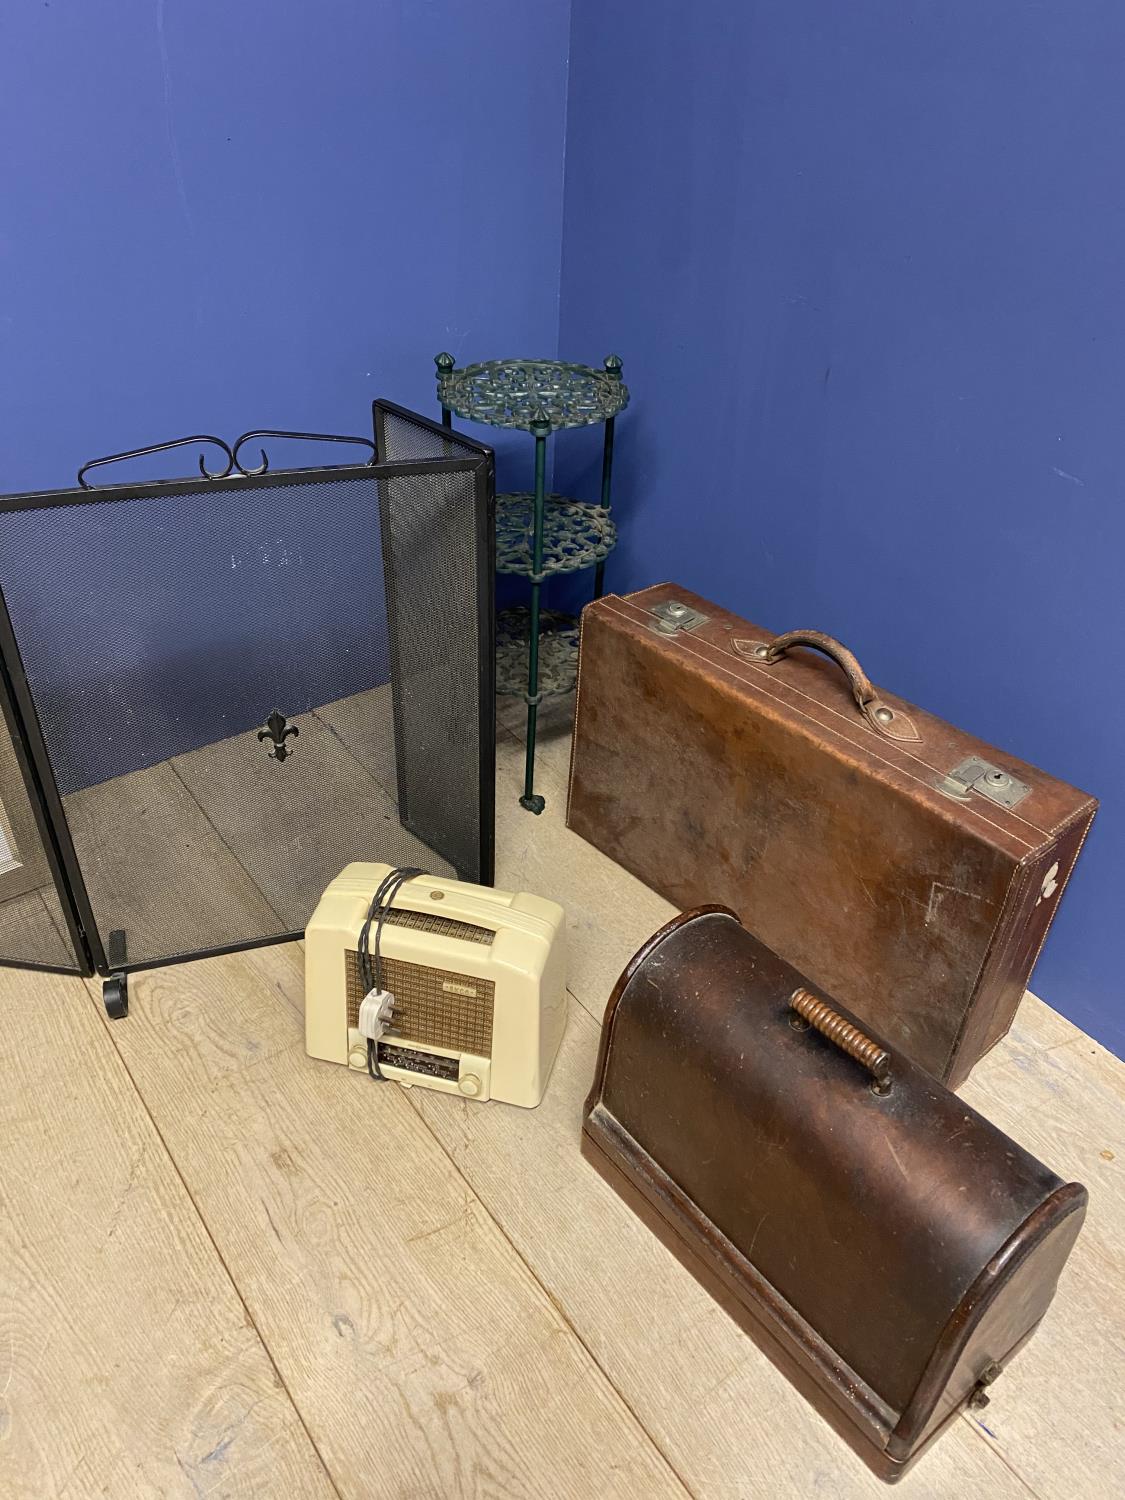 Leather suitcase, fire guard, vintage sewing machine, vintage radio Ekco, and three tier plant stand - Image 3 of 3